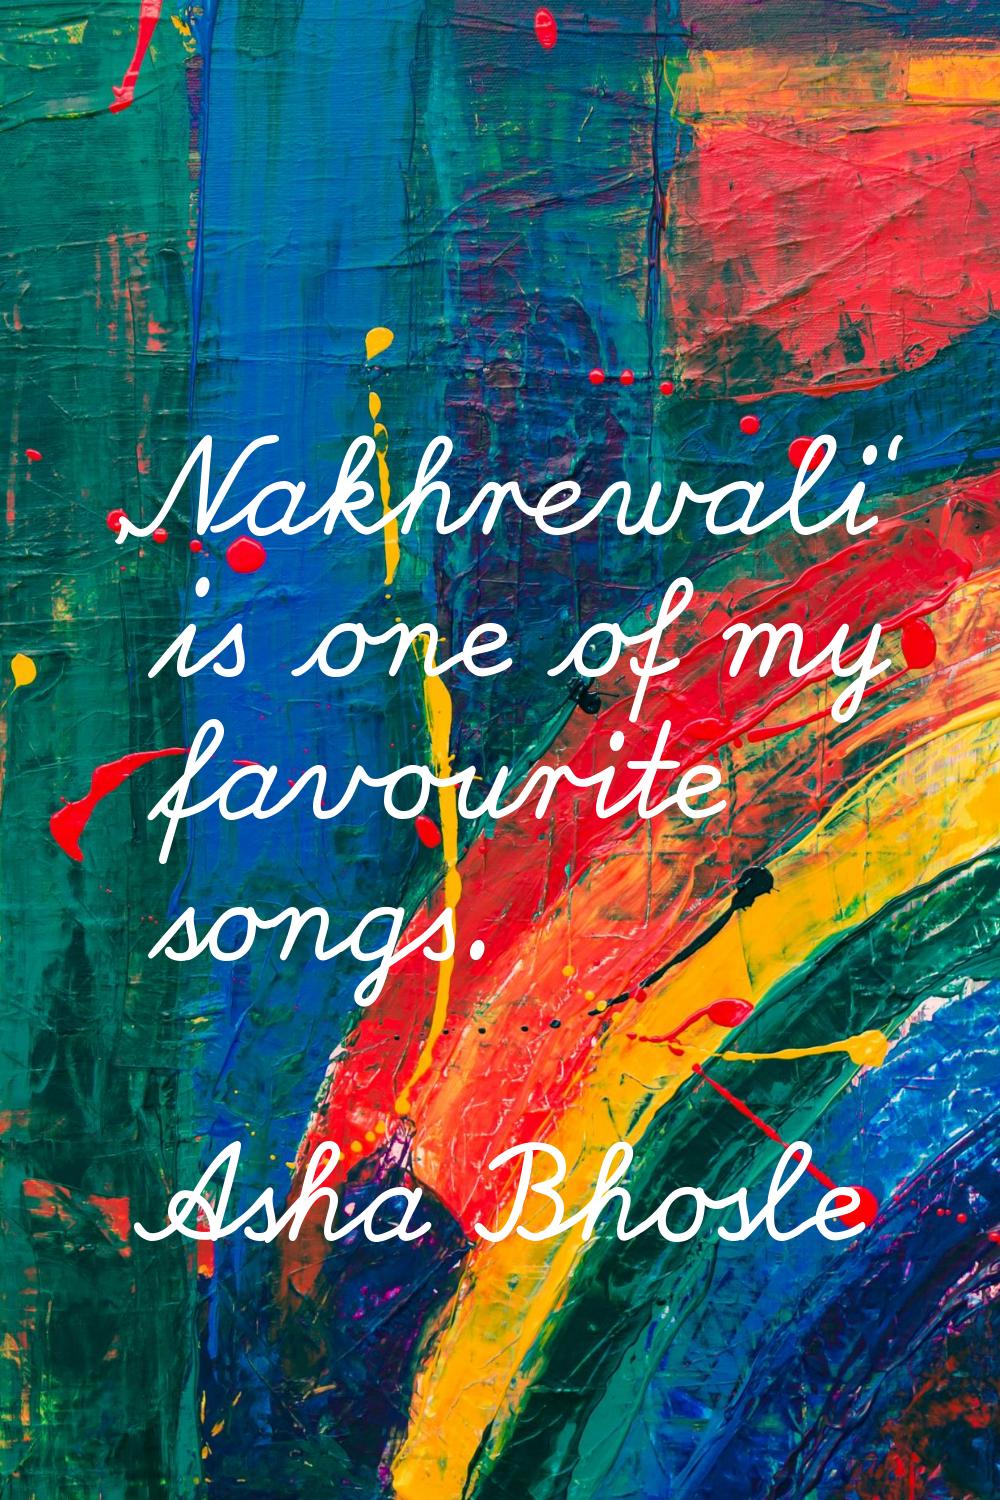 'Nakhrewali' is one of my favourite songs.